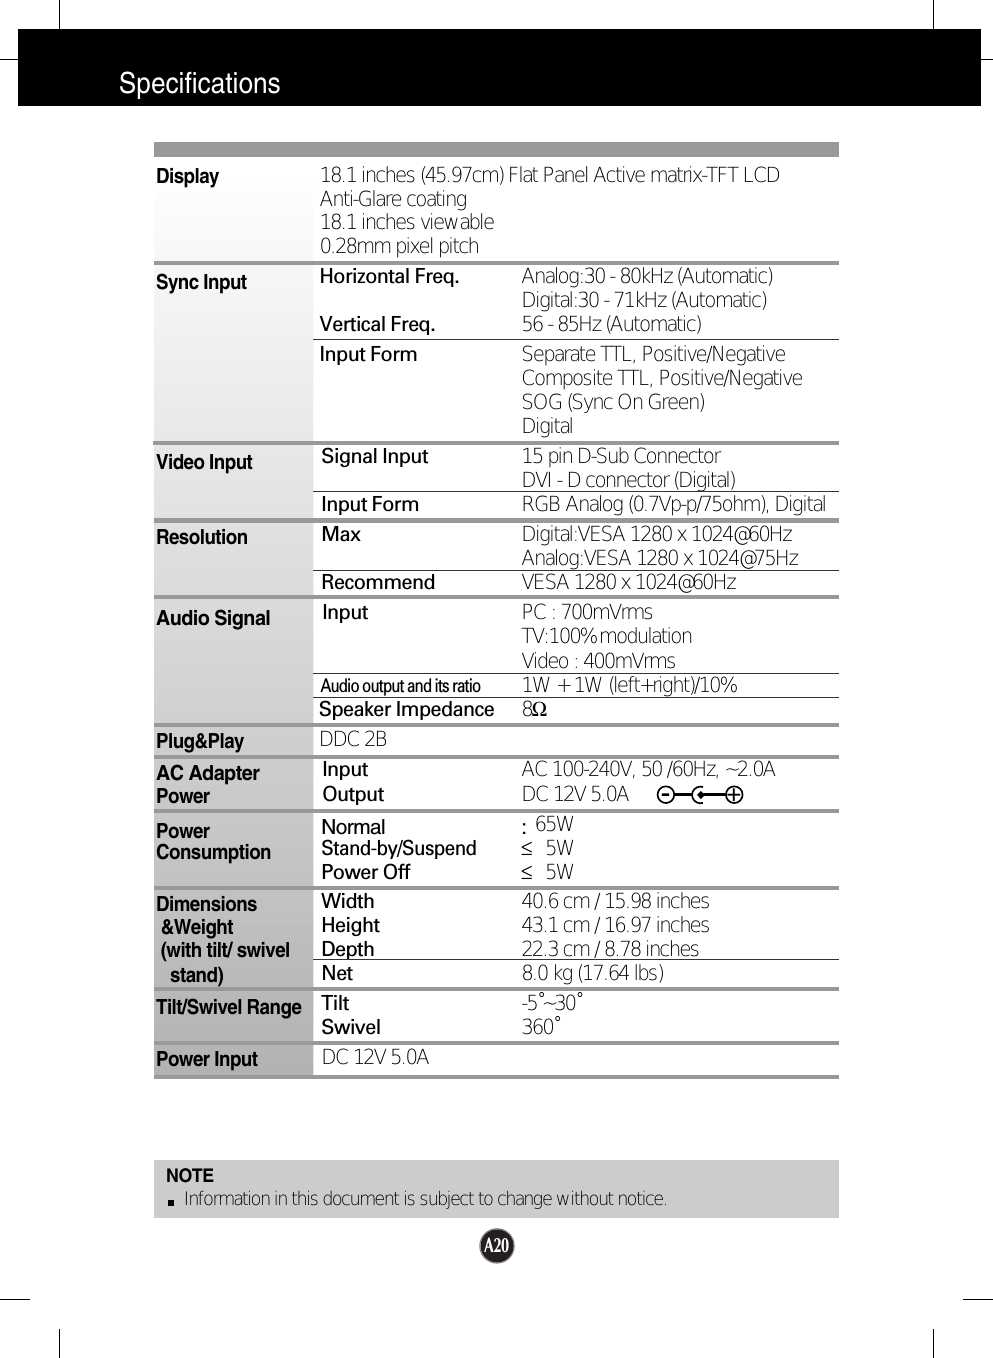 A20SpecificationsNOTEInformation in this document is subject to change without notice.18.1 inches (45.97cm) Flat Panel Active matrix-TFT LCD Anti-Glare coating18.1 inches viewable0.28mm pixel pitchHorizontal Freq. Analog:30 - 80kHz (Automatic)Digital:30 - 71kHz (Automatic)Vertical Freq. 56 - 85Hz (Automatic)Input Form Separate TTL, Positive/NegativeComposite TTL, Positive/NegativeSOG (Sync On Green) DigitalSignal Input 15 pin D-Sub ConnectorDVI - D connector (Digital)Input Form RGB Analog (0.7Vp-p/75ohm), DigitalMax Digital:VESA 1280 x 1024@60HzAnalog:VESA 1280 x 1024@75Hz Recommend VESA 1280 x 1024@60HzInput PC : 700mVrmsTV:100%modulationVideo : 400mVrmsAudio output and its ratio1W + 1W (left+right)/10%Speaker Impedance 8ΩDDC 2BInput AC 100-240V, 50 /60Hz, ~2.0AOutput DC 12V 5.0ANormal :65WStand-by/Suspend≤5WPower Off ≤5WWidth 40.6 cm / 15.98 inchesHeight 43.1 cm / 16.97 inchesDepth 22.3 cm / 8.78 inchesNet 8.0 kg (17.64 lbs)Tilt -5˚~30˚Swivel 360˚DC 12V 5.0ADisplaySync InputVideo InputResolutionAudio SignalPlug&amp;PlayAC AdapterPowerPowerConsumptionDimensions&amp;Weight(with tilt/ swivel       stand)Tilt/Swivel RangePower Input-+